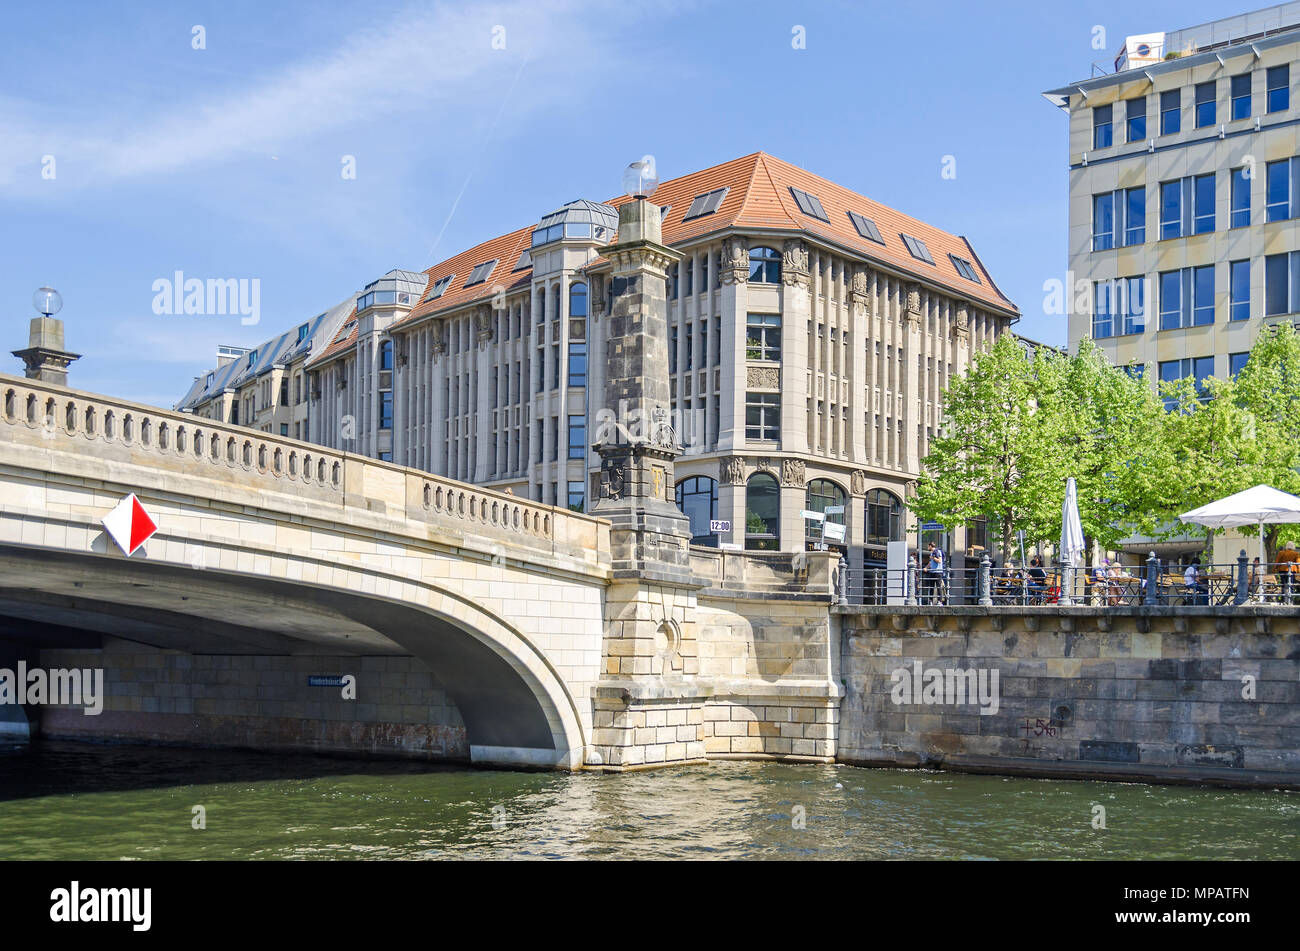 Berlin, Germany - April 22, 2018: Eastern shore of the river Spree Spreeufer with the building of the theological faculty of the Humboldt University,  Stock Photo